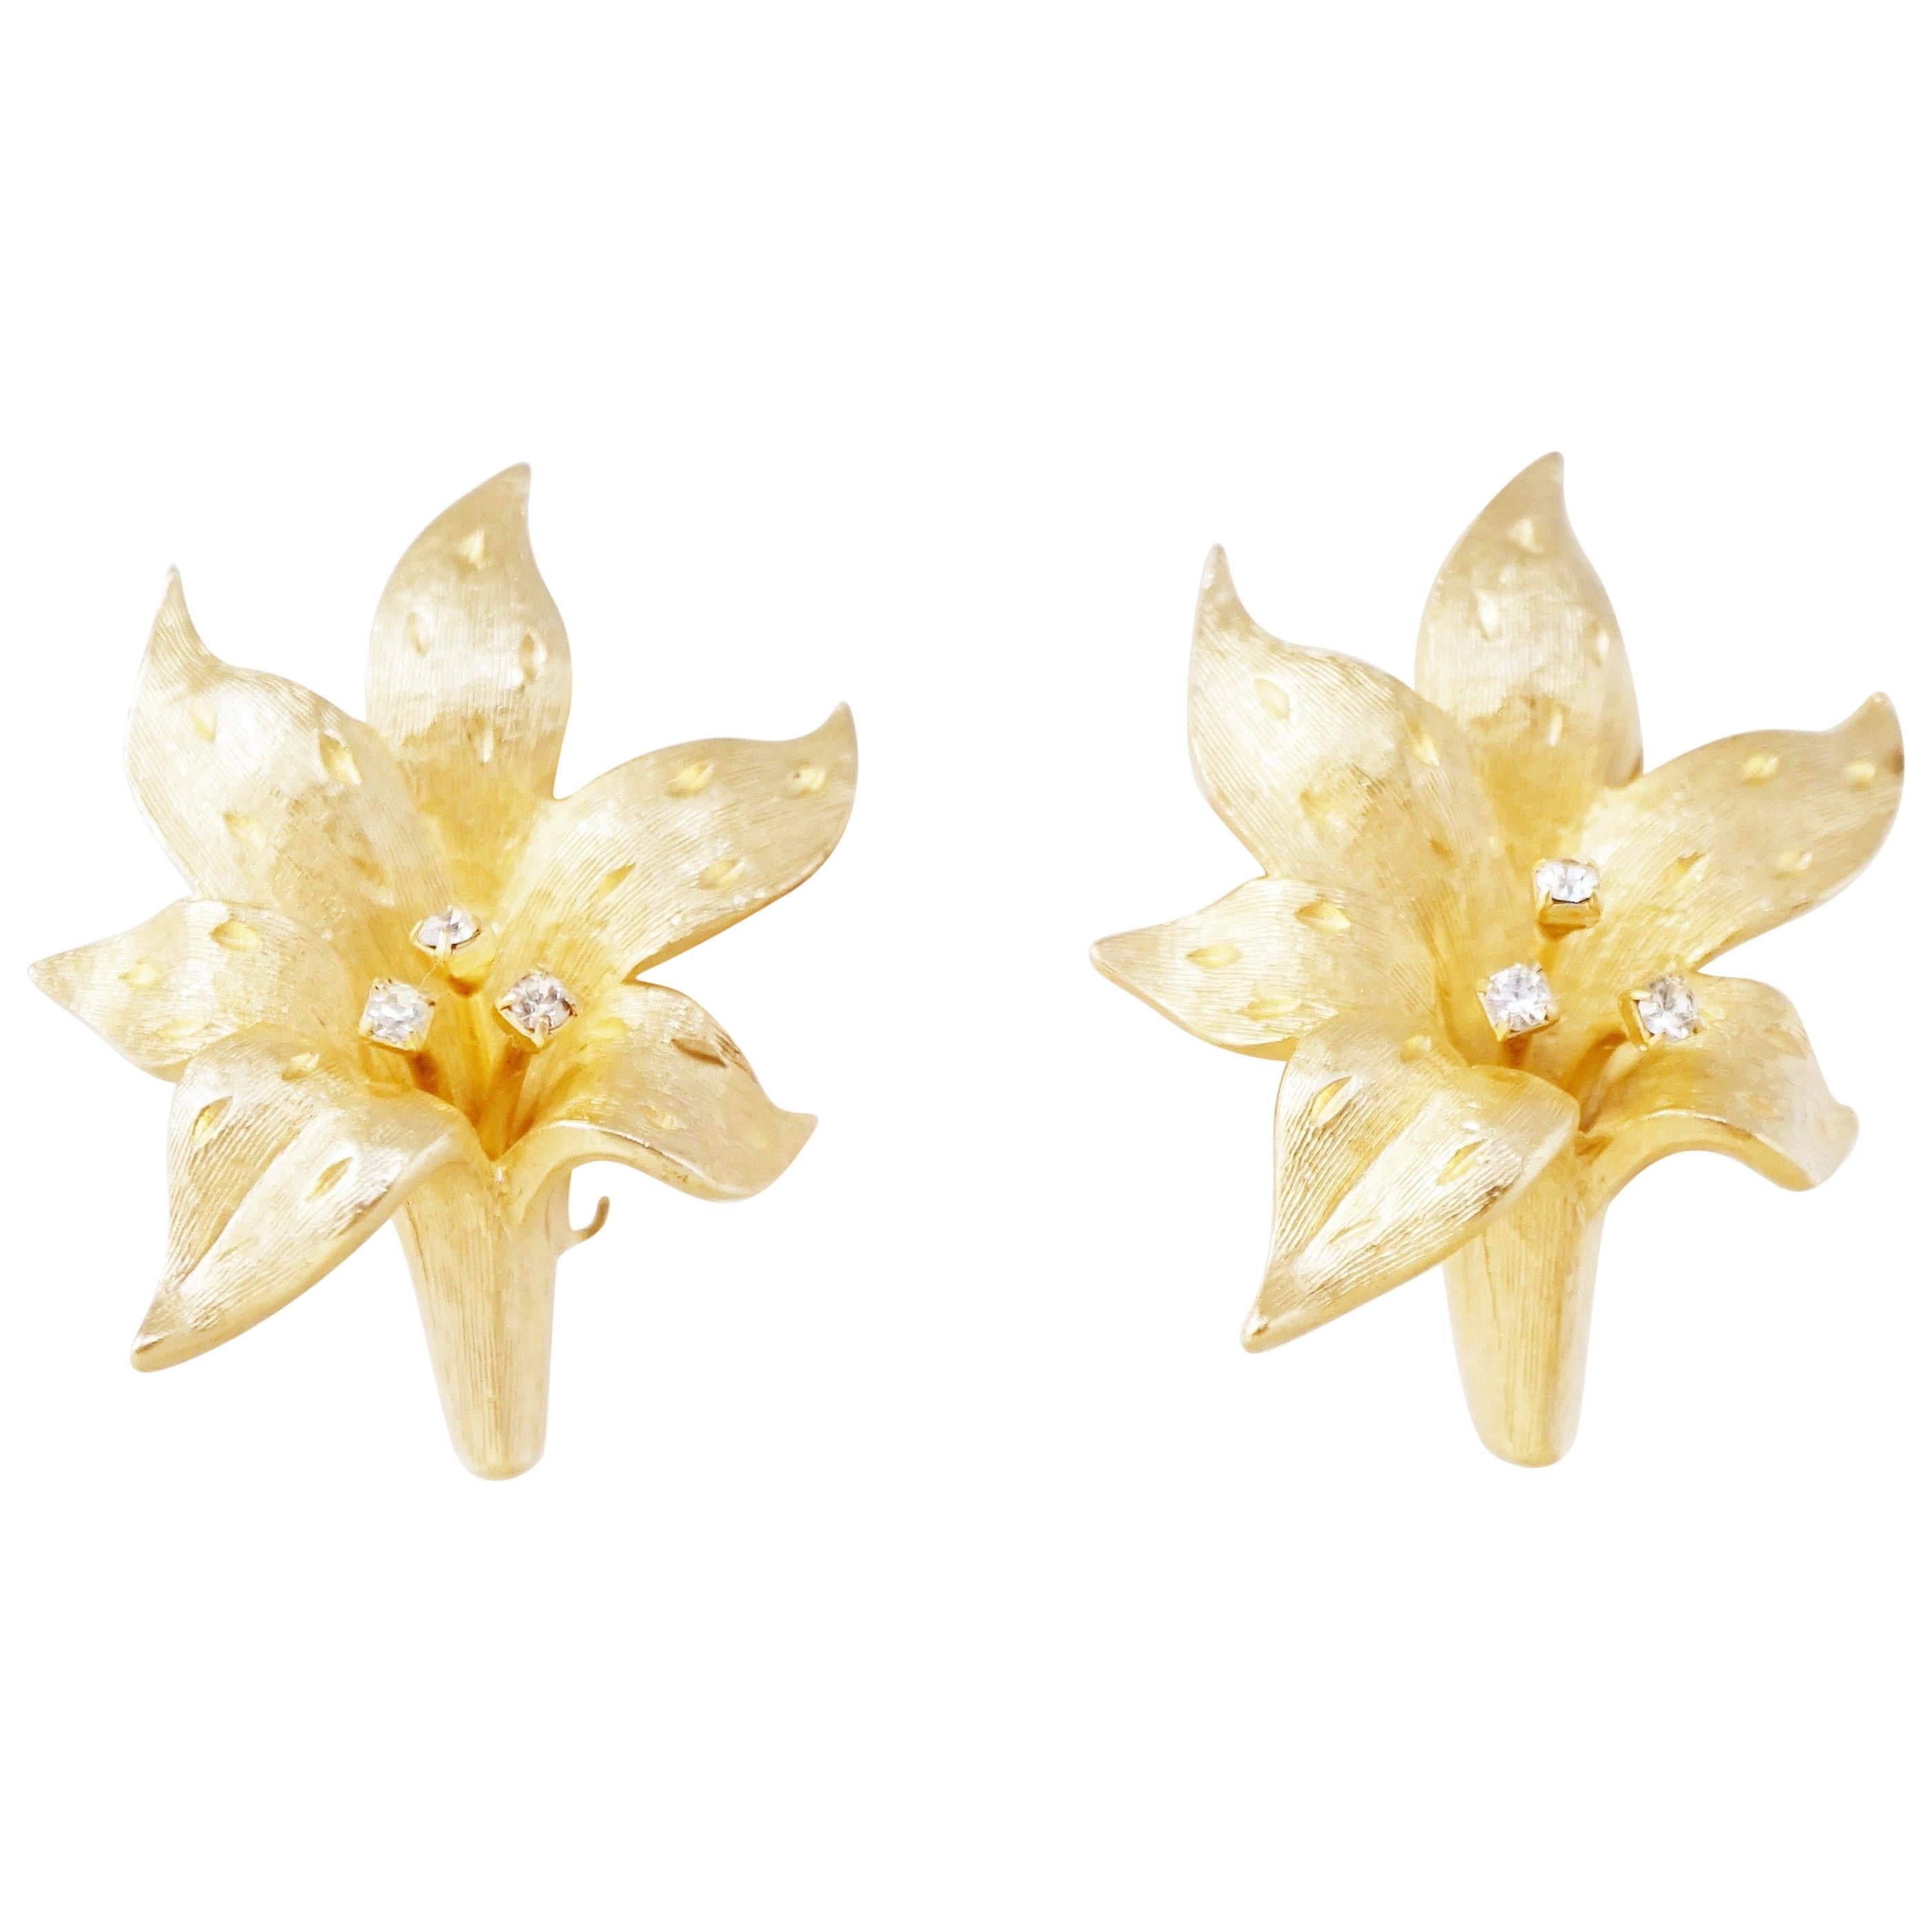 Vintage Gilded Lily Flower Figural Earrings With Crystals by Erwin Pearl, 1990s